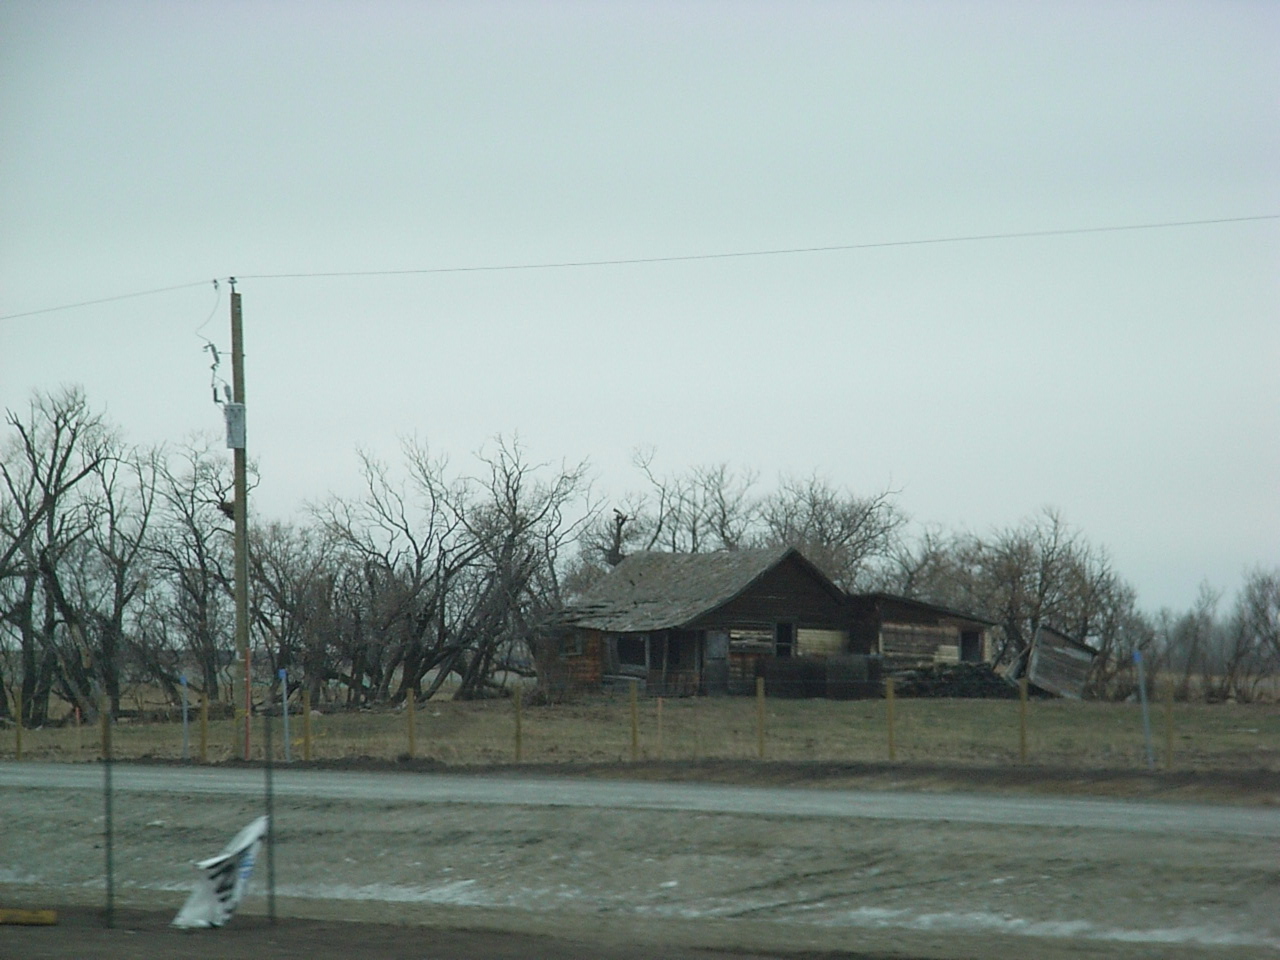 a po of an old barn on the side of the road